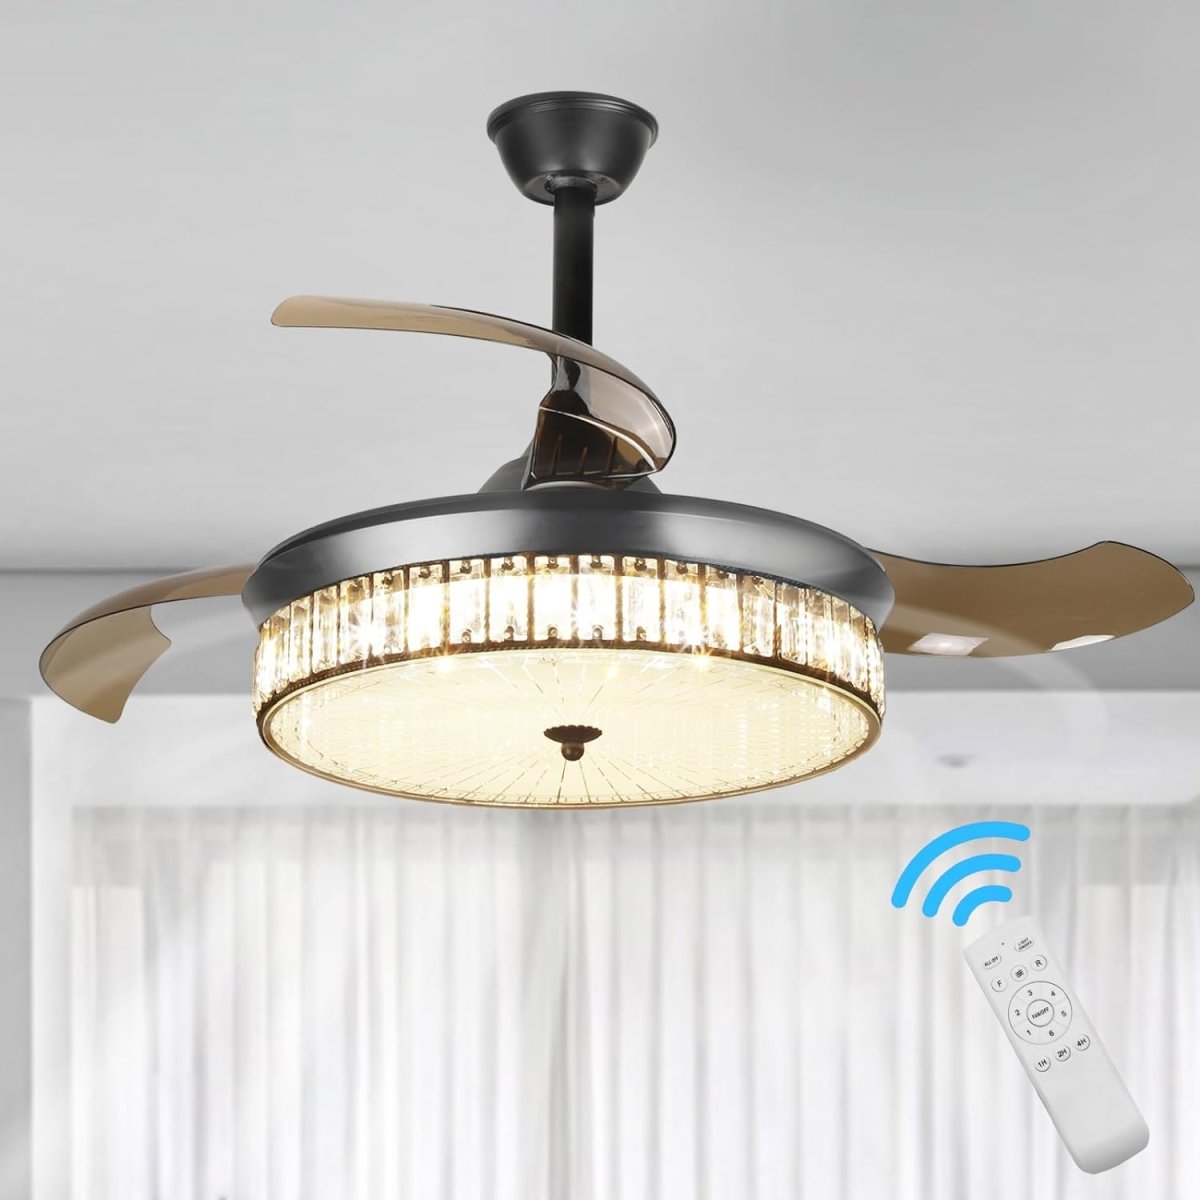 Depuley 42" Retractable Crystal Ceiling Fan with Light and Remote, Modern Fandelier with Reversible Invisible Blades, 3 Light Changes 6 Speeds, Noise-Free Chandelier Ceiling Fan for Bedroom, Living Room - WS-FPZ60-36C-BK 1 | DEPULEY